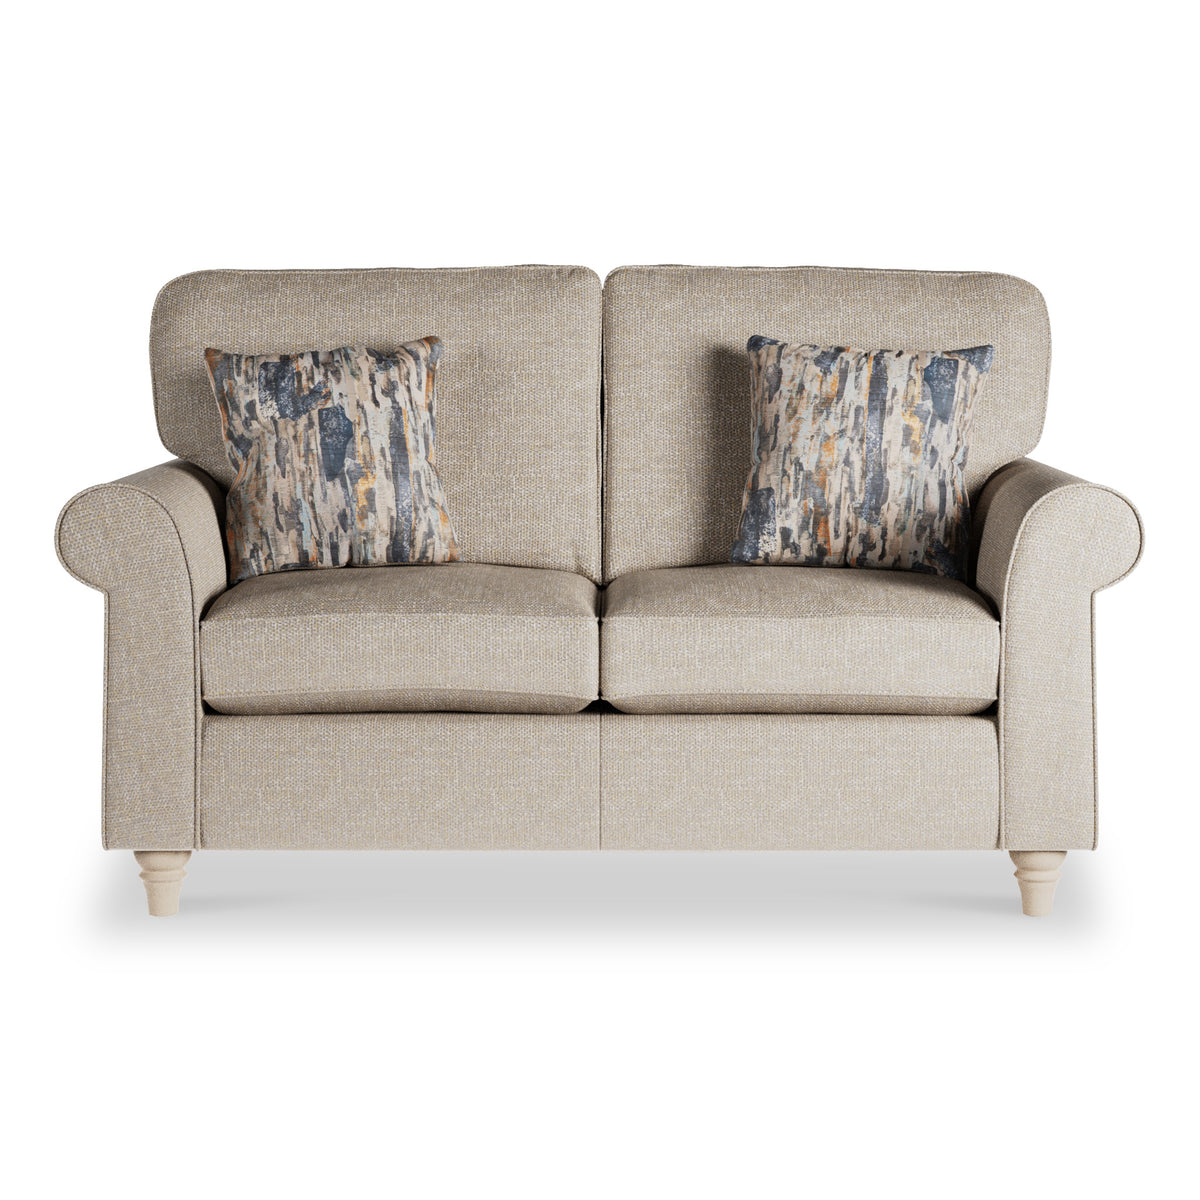 Jude Dijon 2 Seater Couch